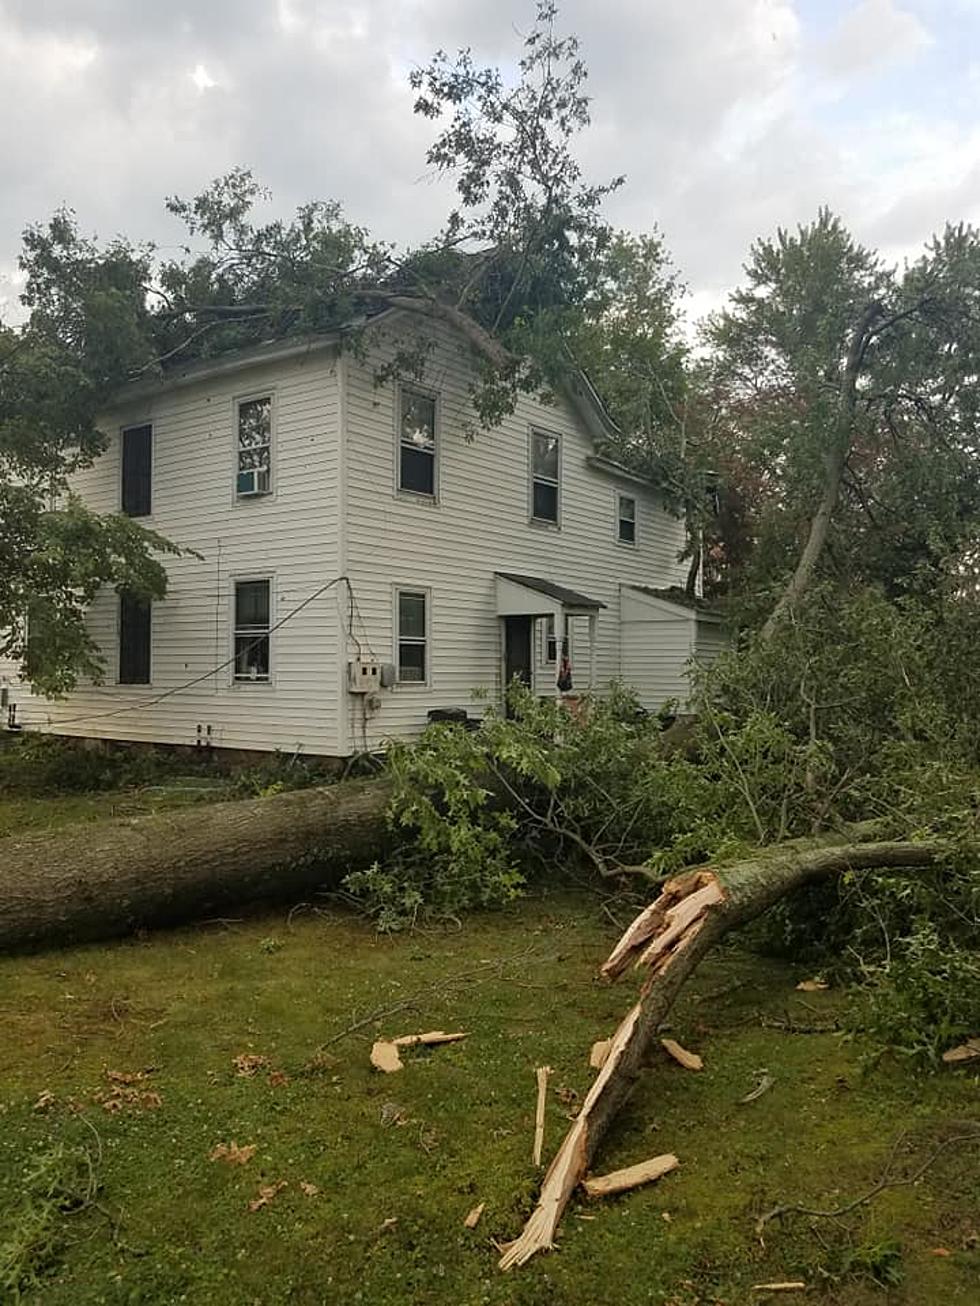 Storm Ravages Parts of Coxsackie, Residents Speculate Tornado